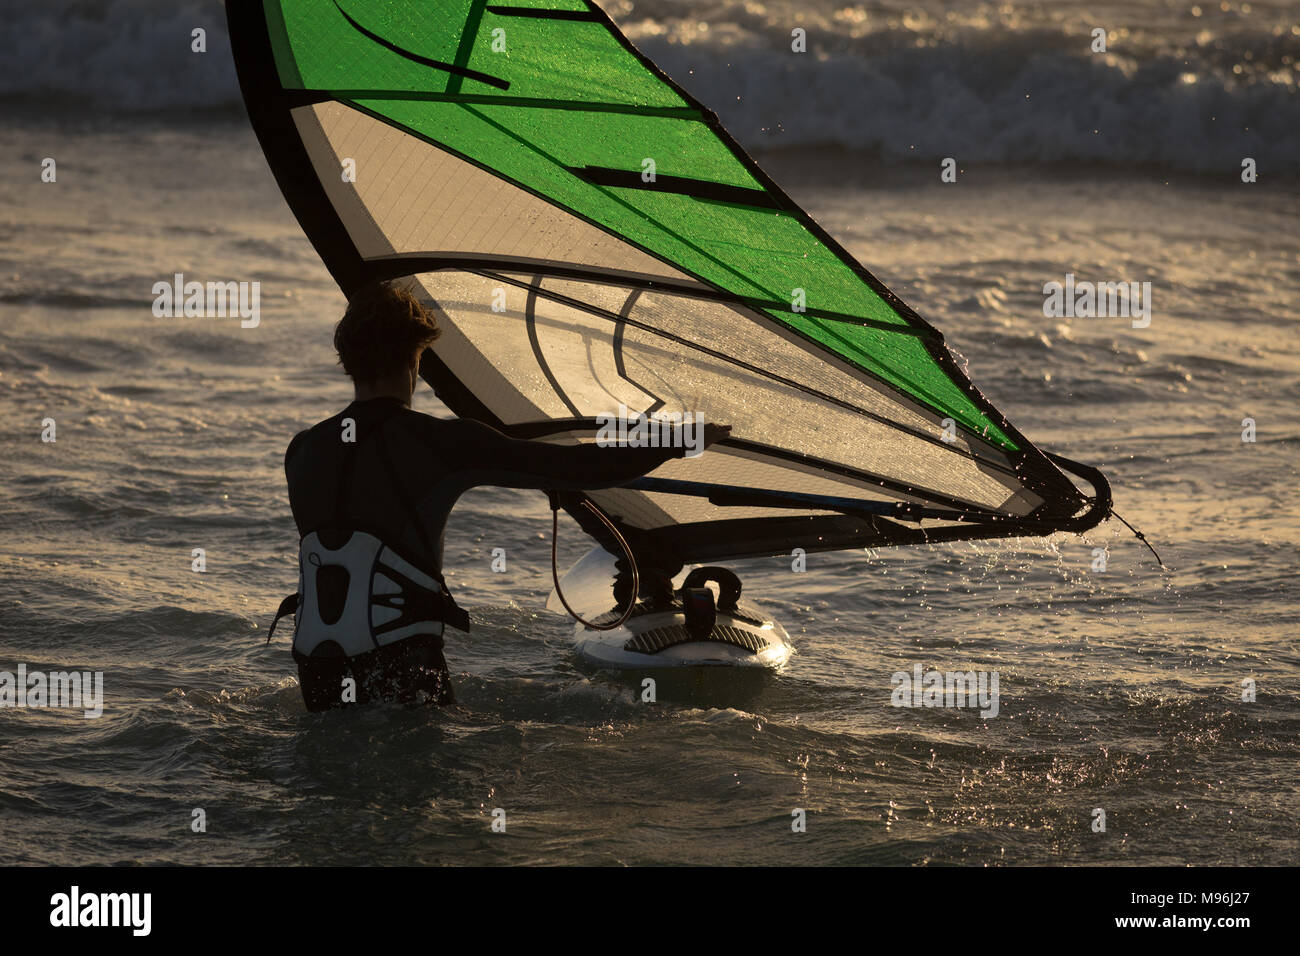 Male surfer surfing with surfboard and kite Stock Photo